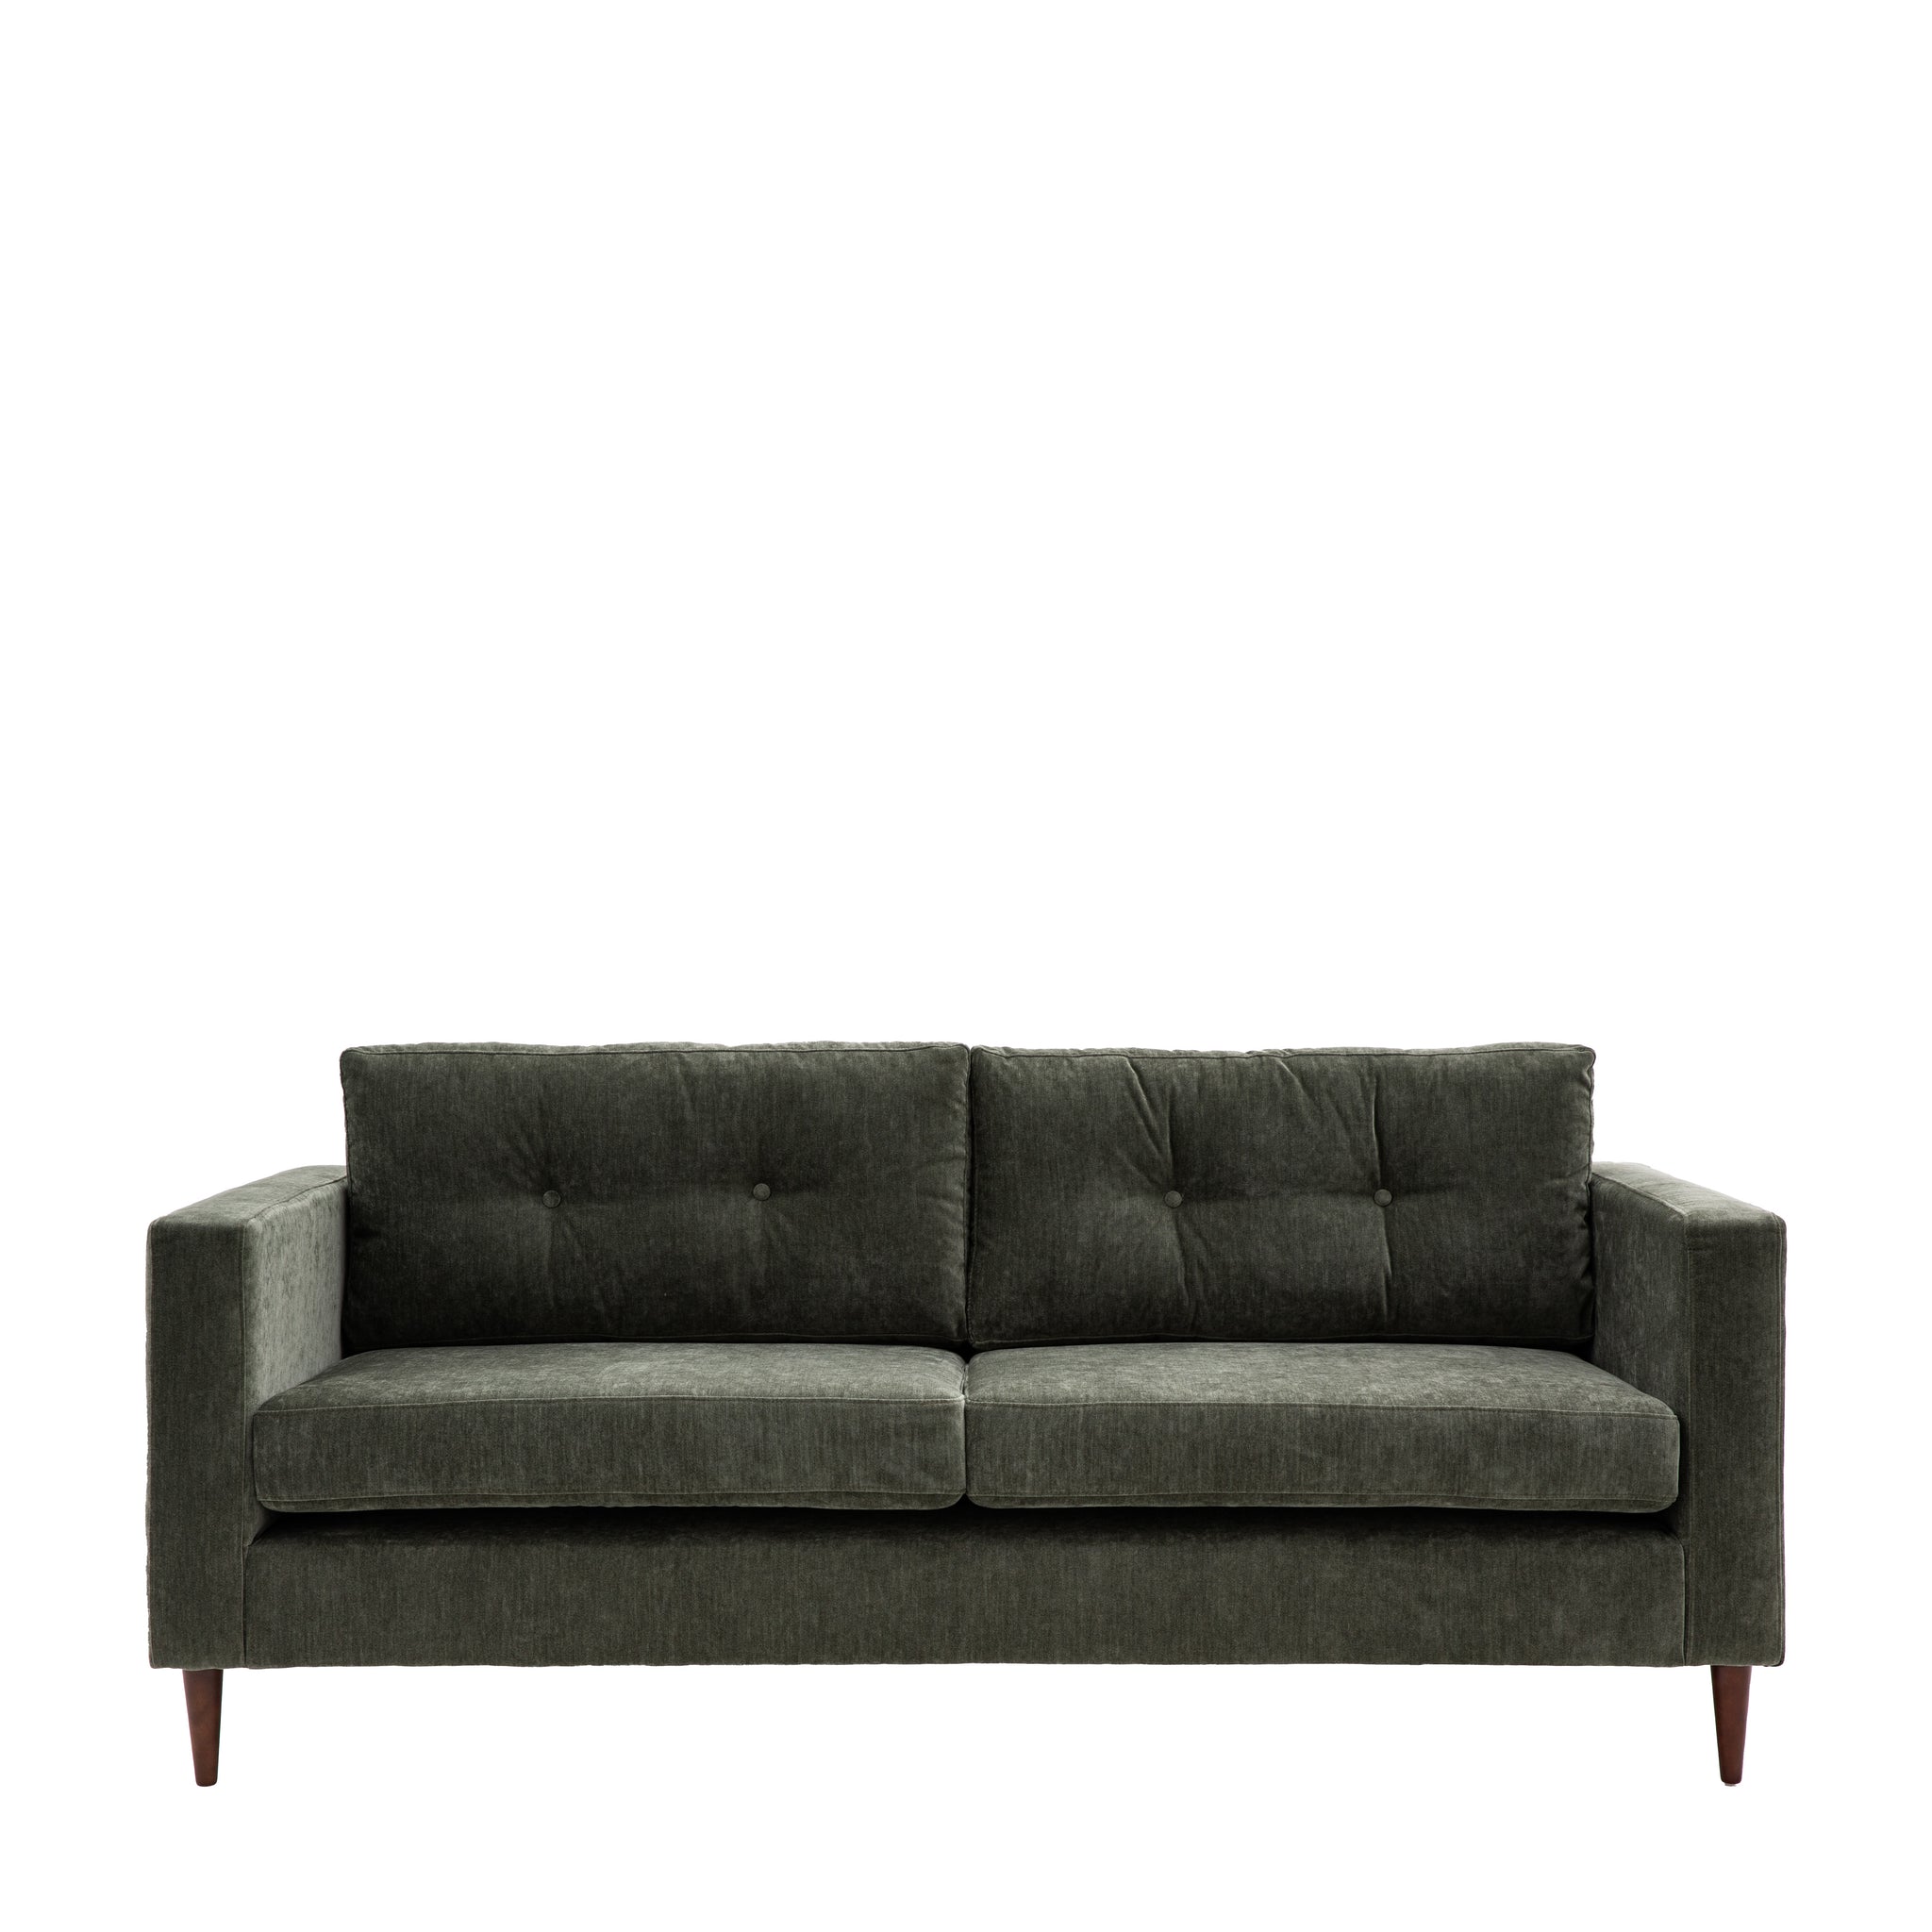 Fenwick Sofa 3 Seater Forest